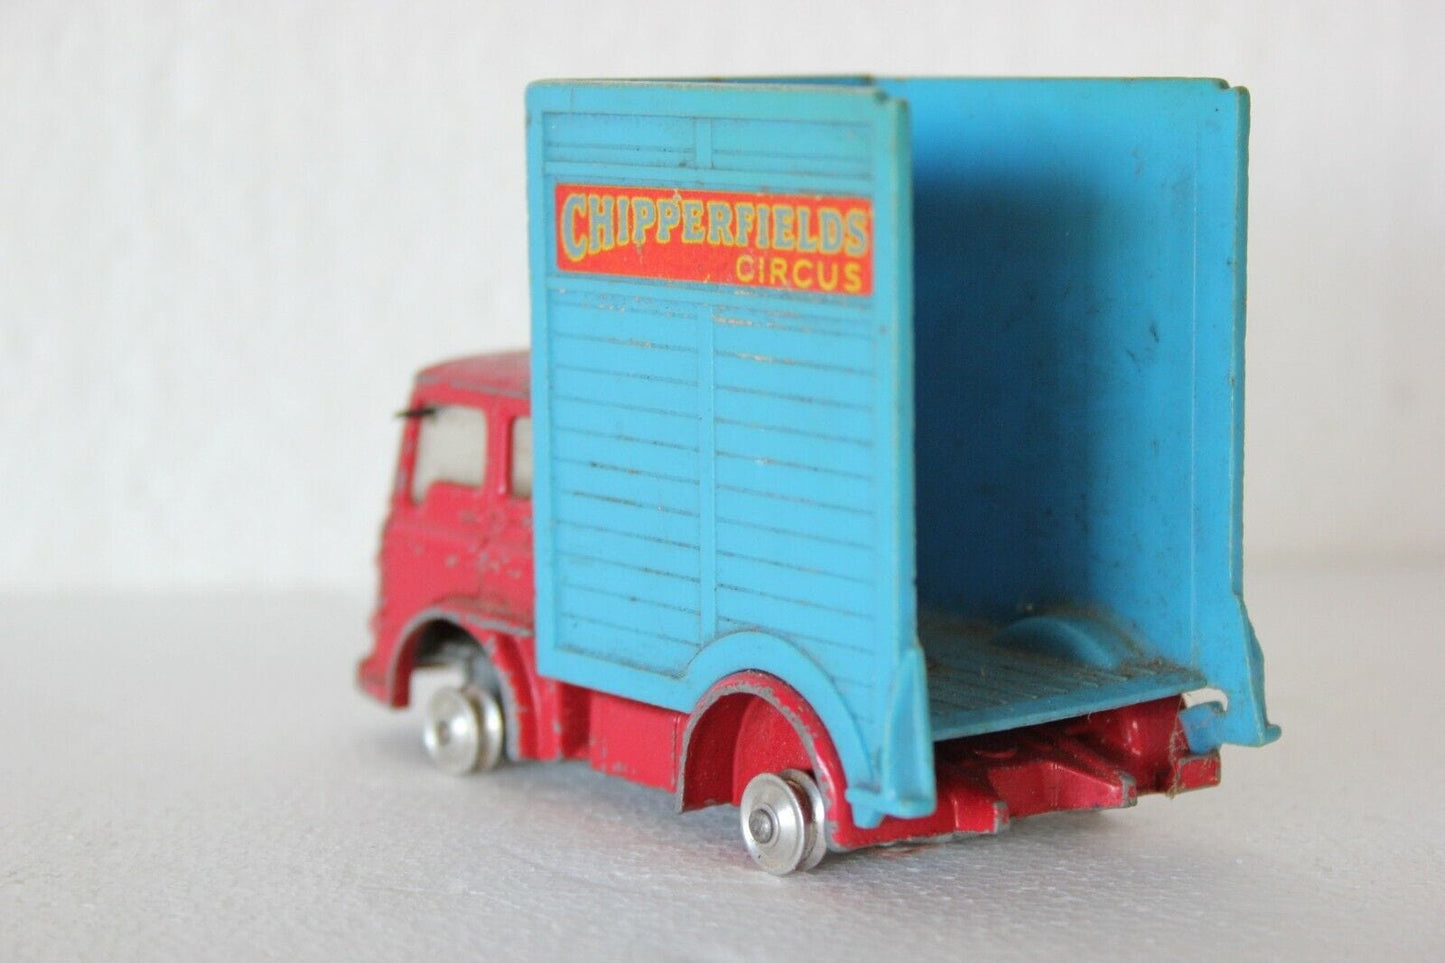 CORGI TOYS BEDFORD TRACTOR VINTAGE UNIT REF 21101/59 CHIPPERFIELDS CIRCUS Giocattoli vintage